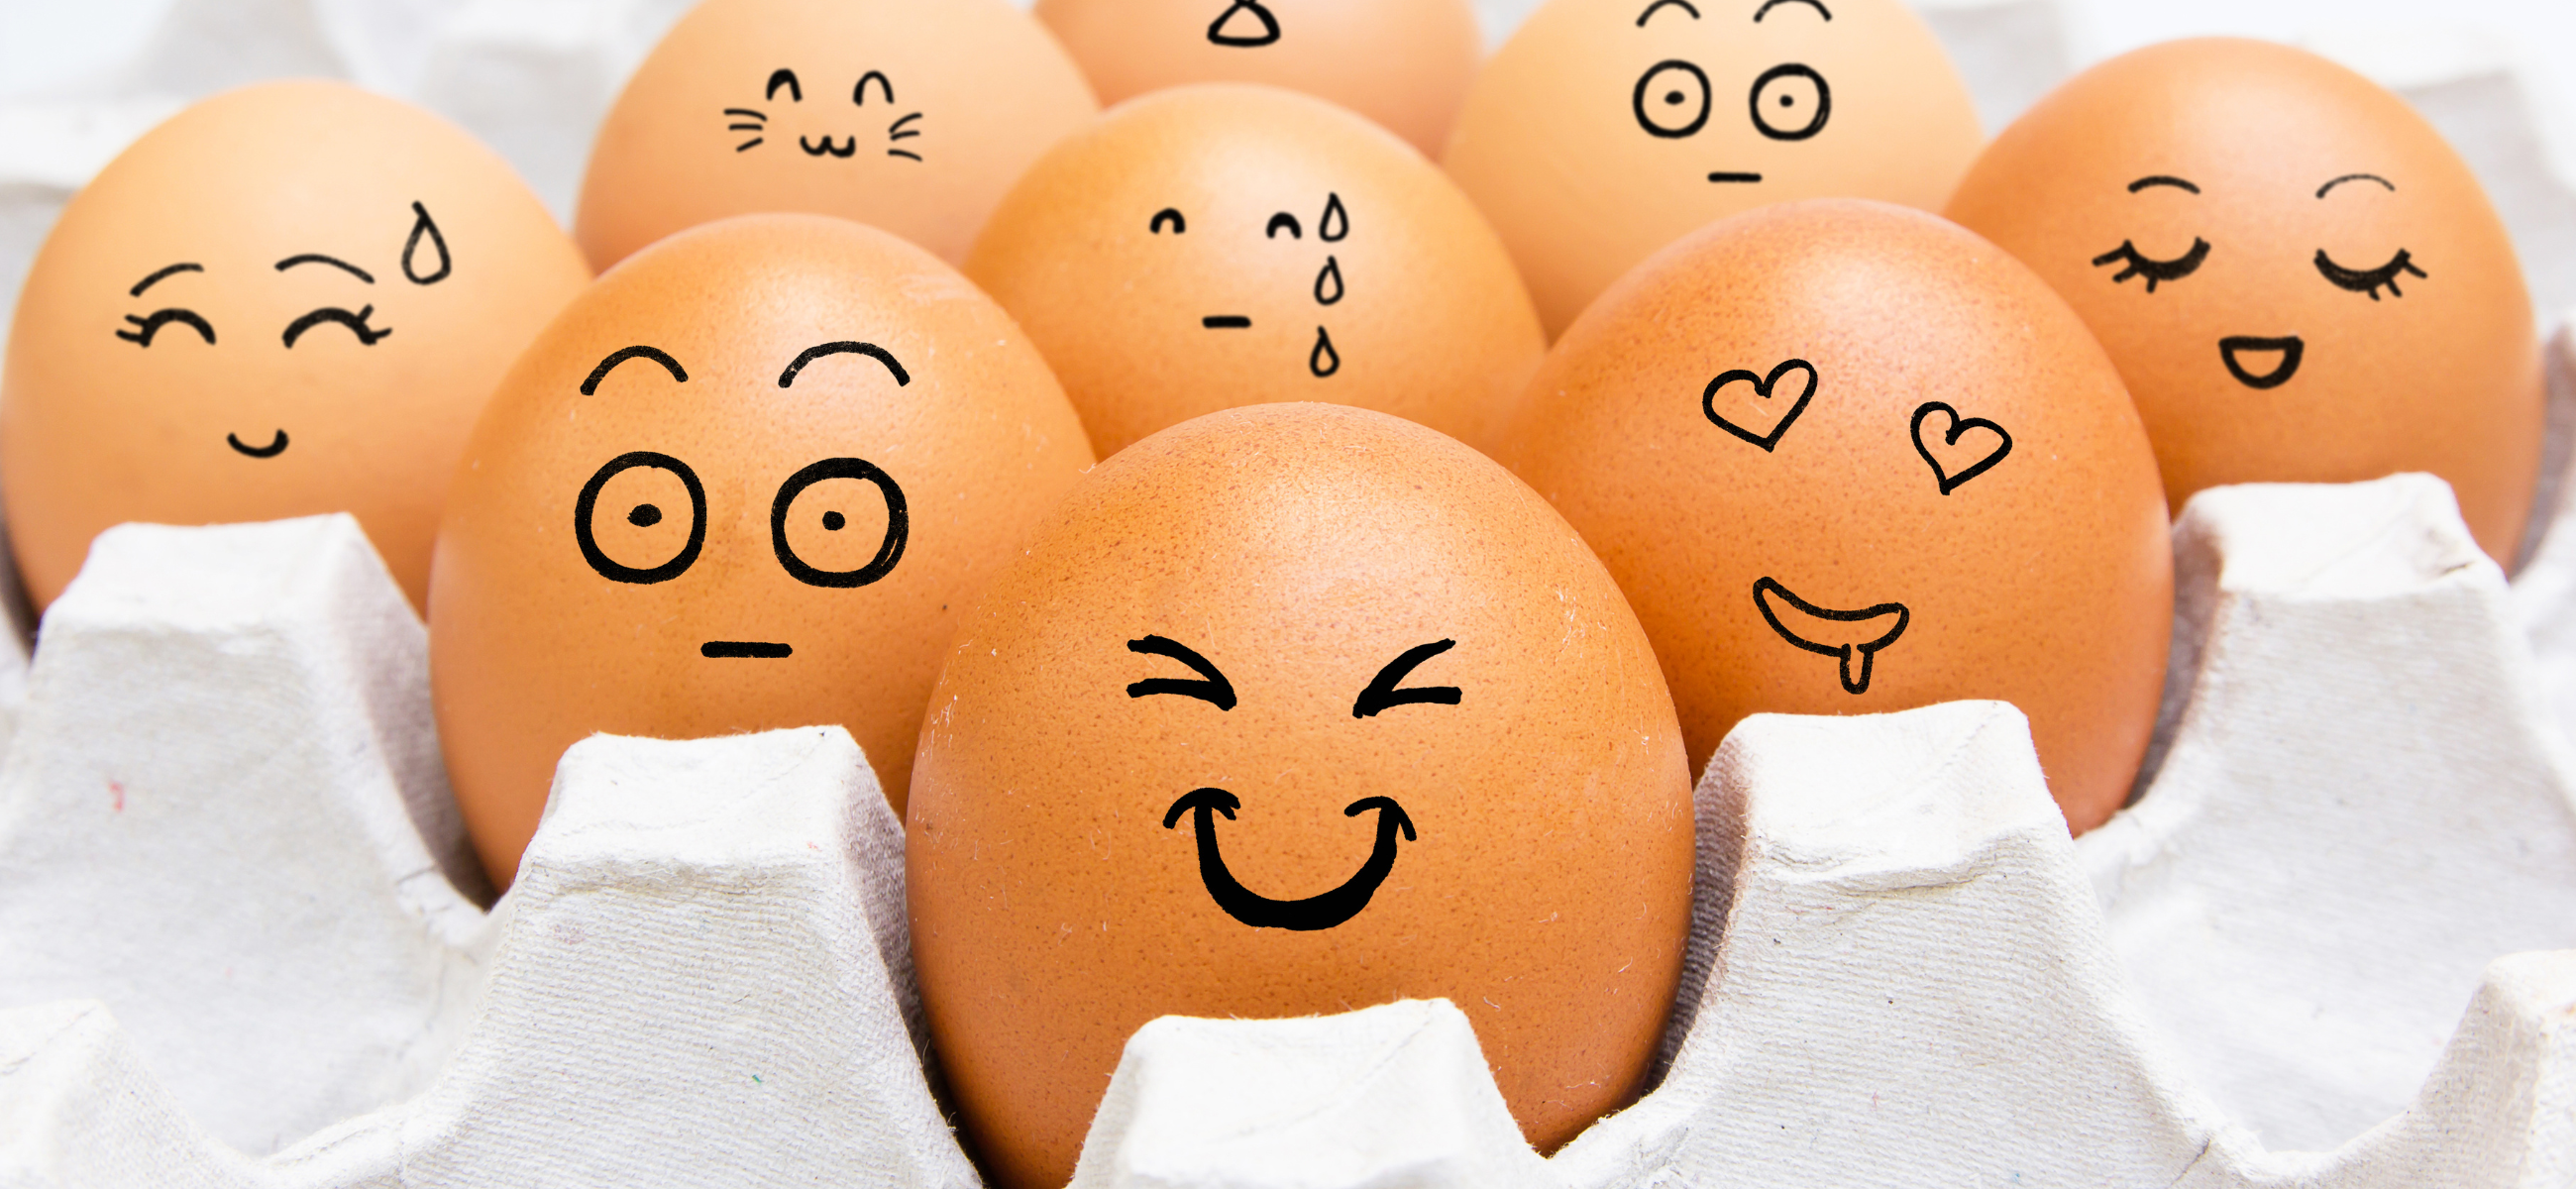 Eggs in carton with faces